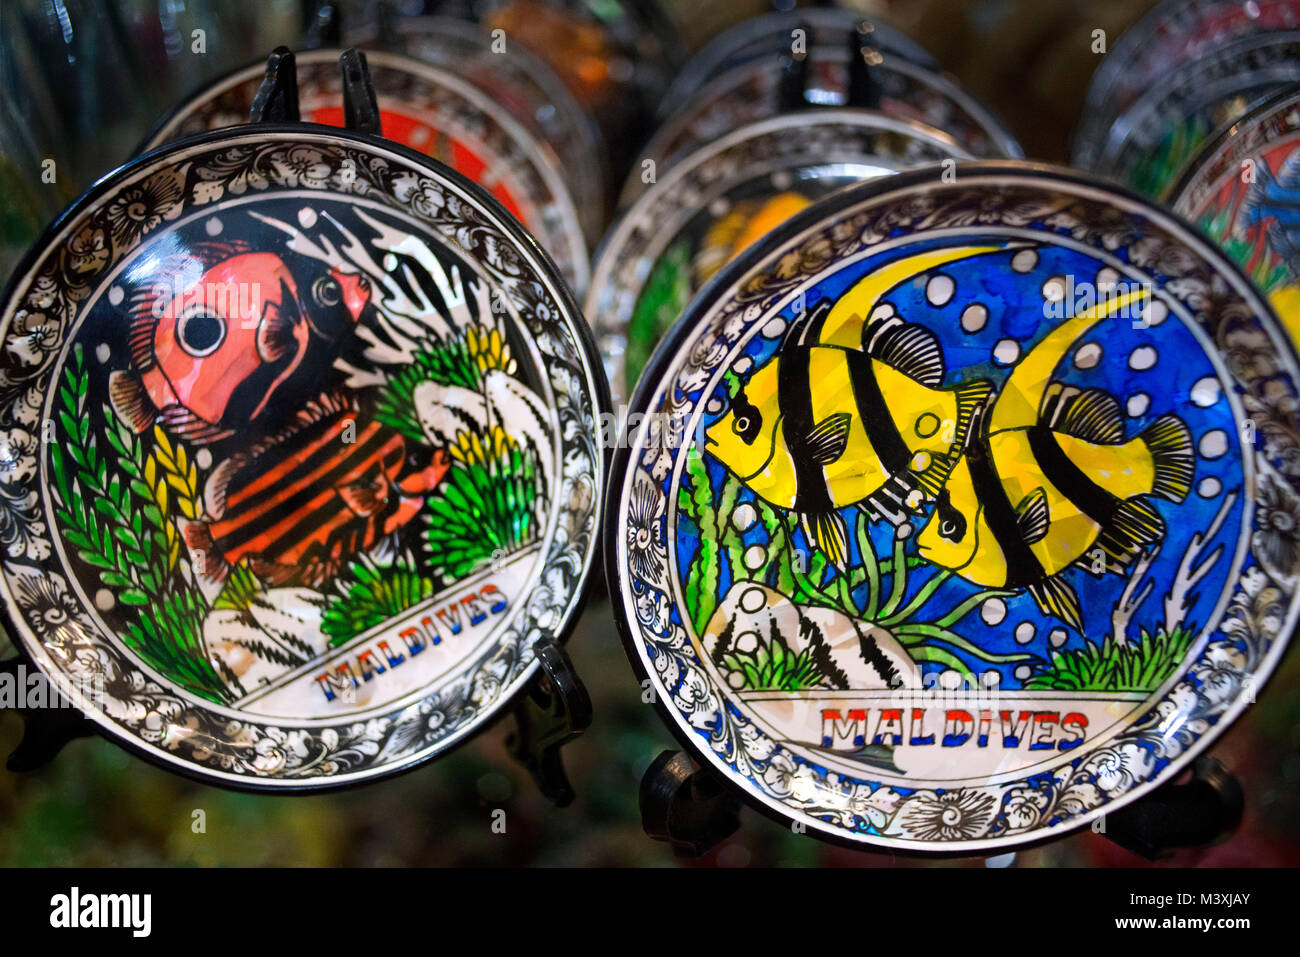 Paintings of Maldives island fishes as souvenir in dishes, Malè, Maldives Stock Photo